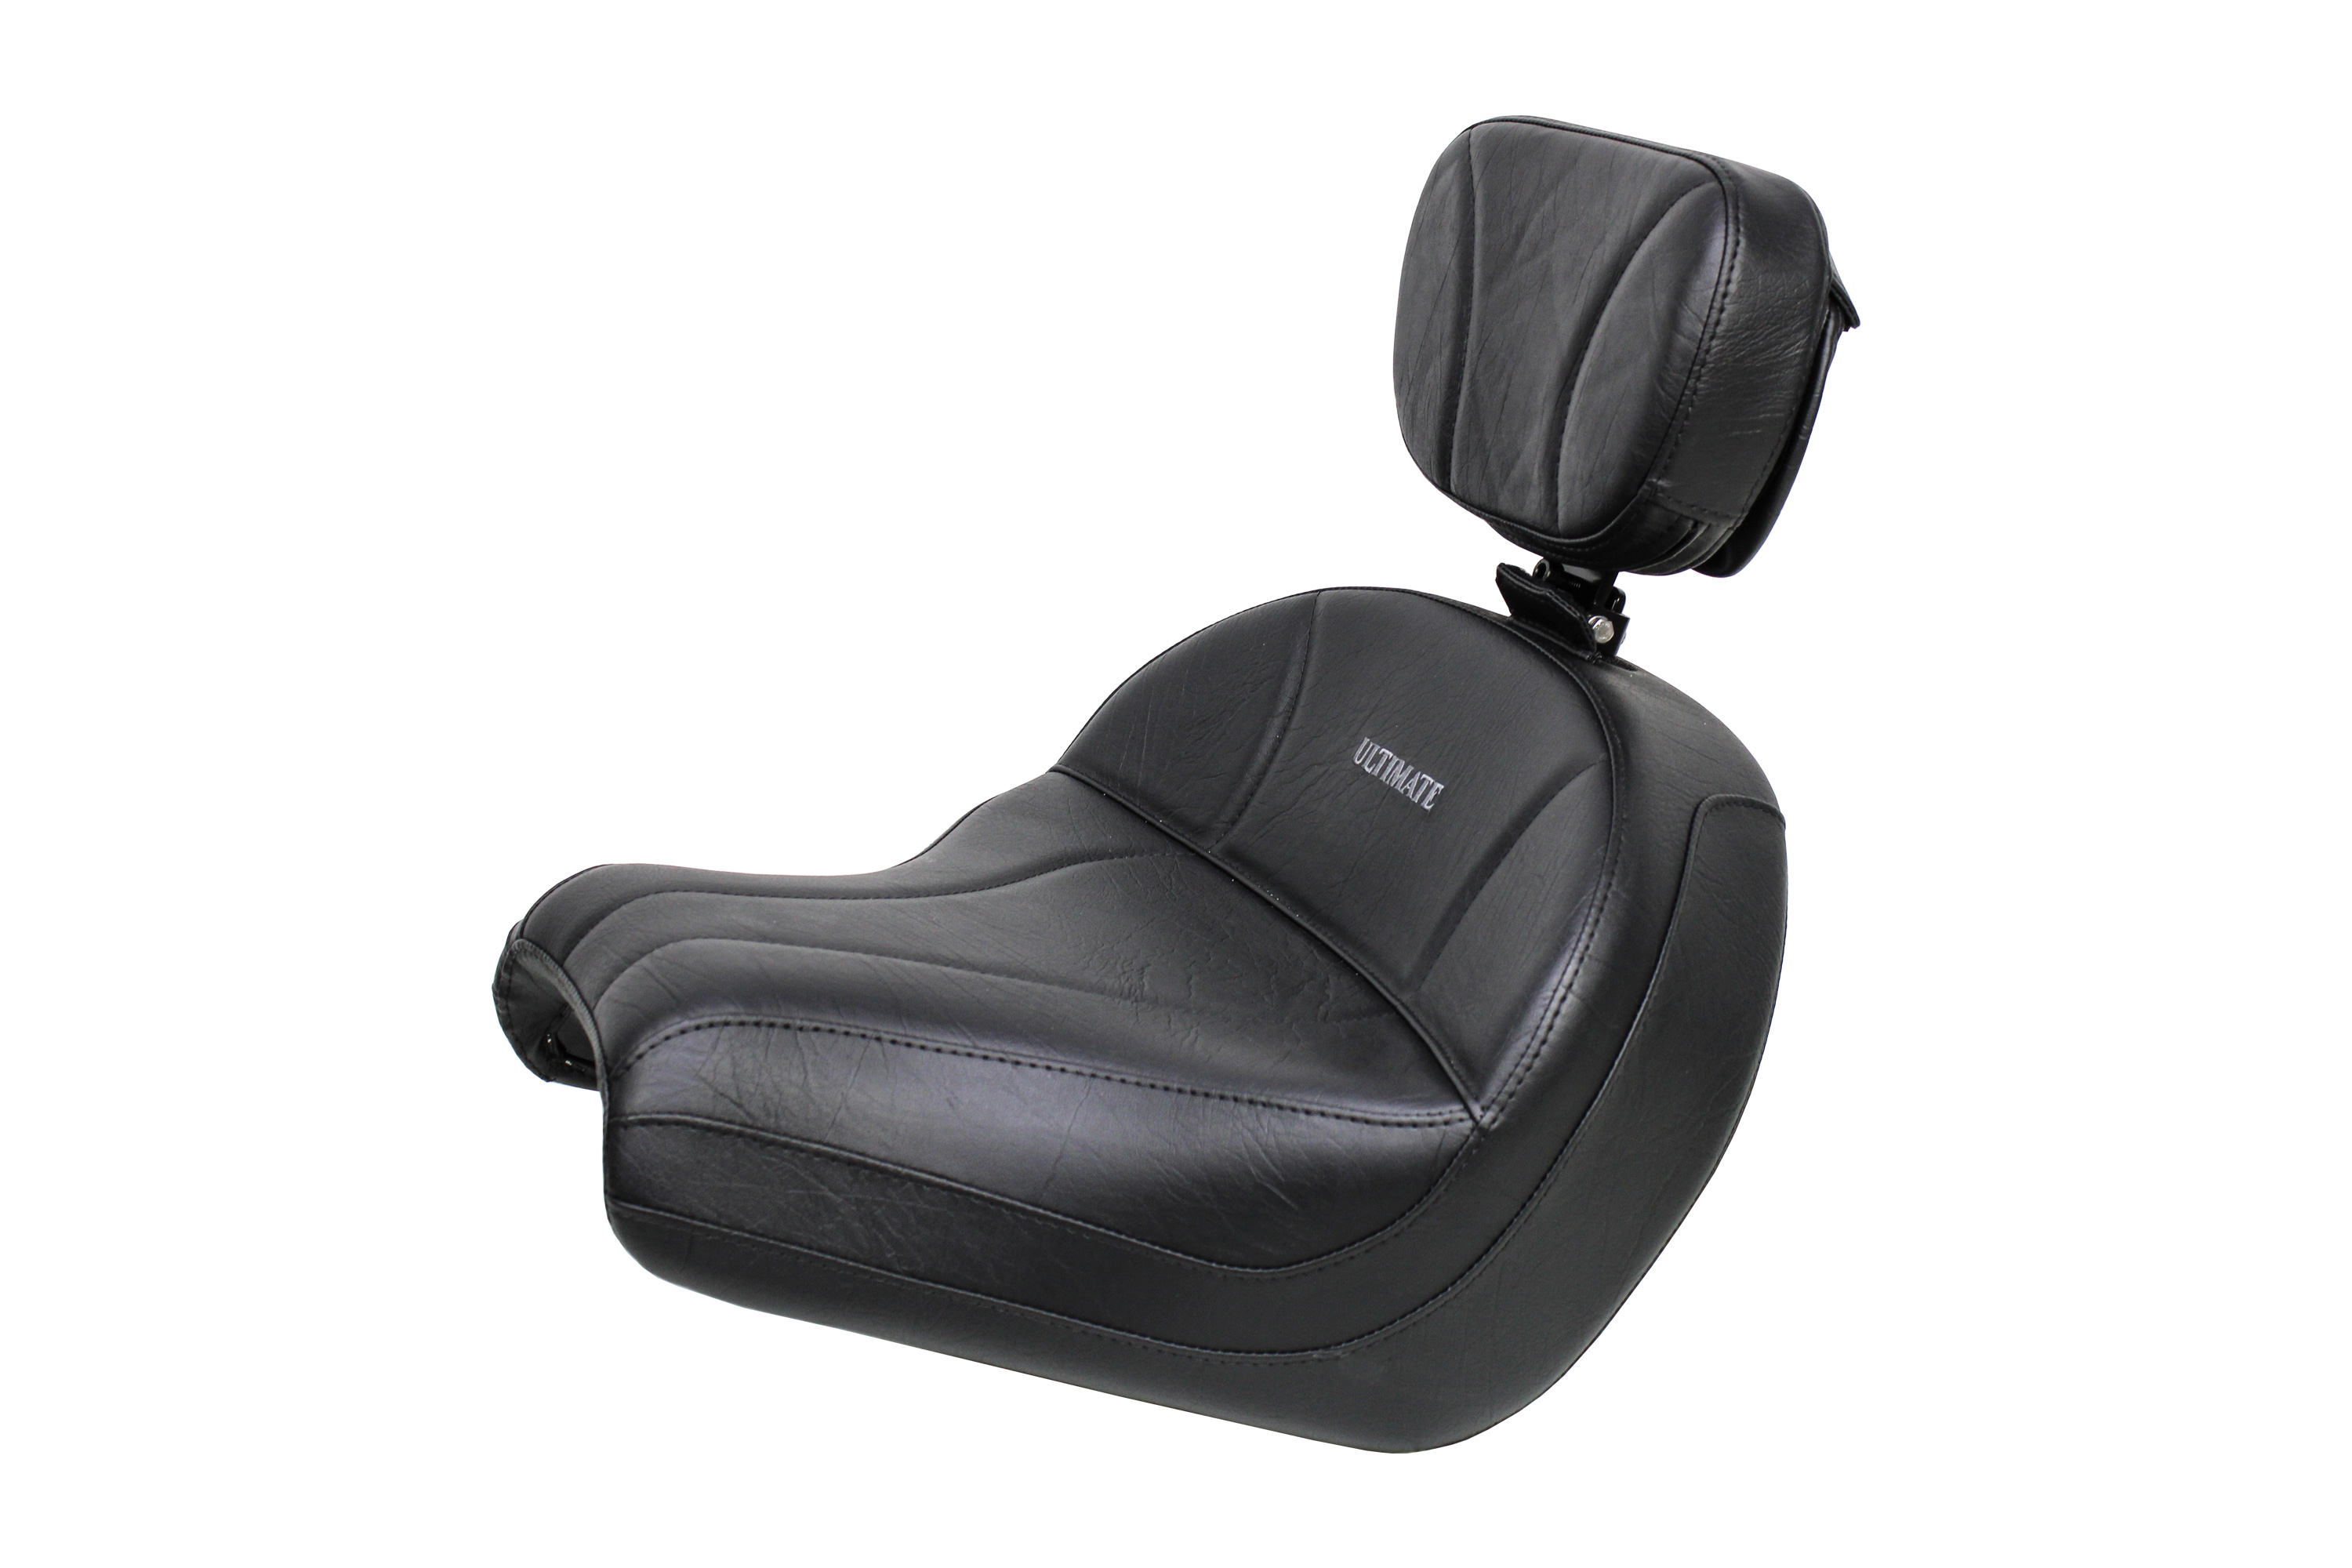 VTX 1300 C Midrider Seat and Driver Backrest - Plain or Studded